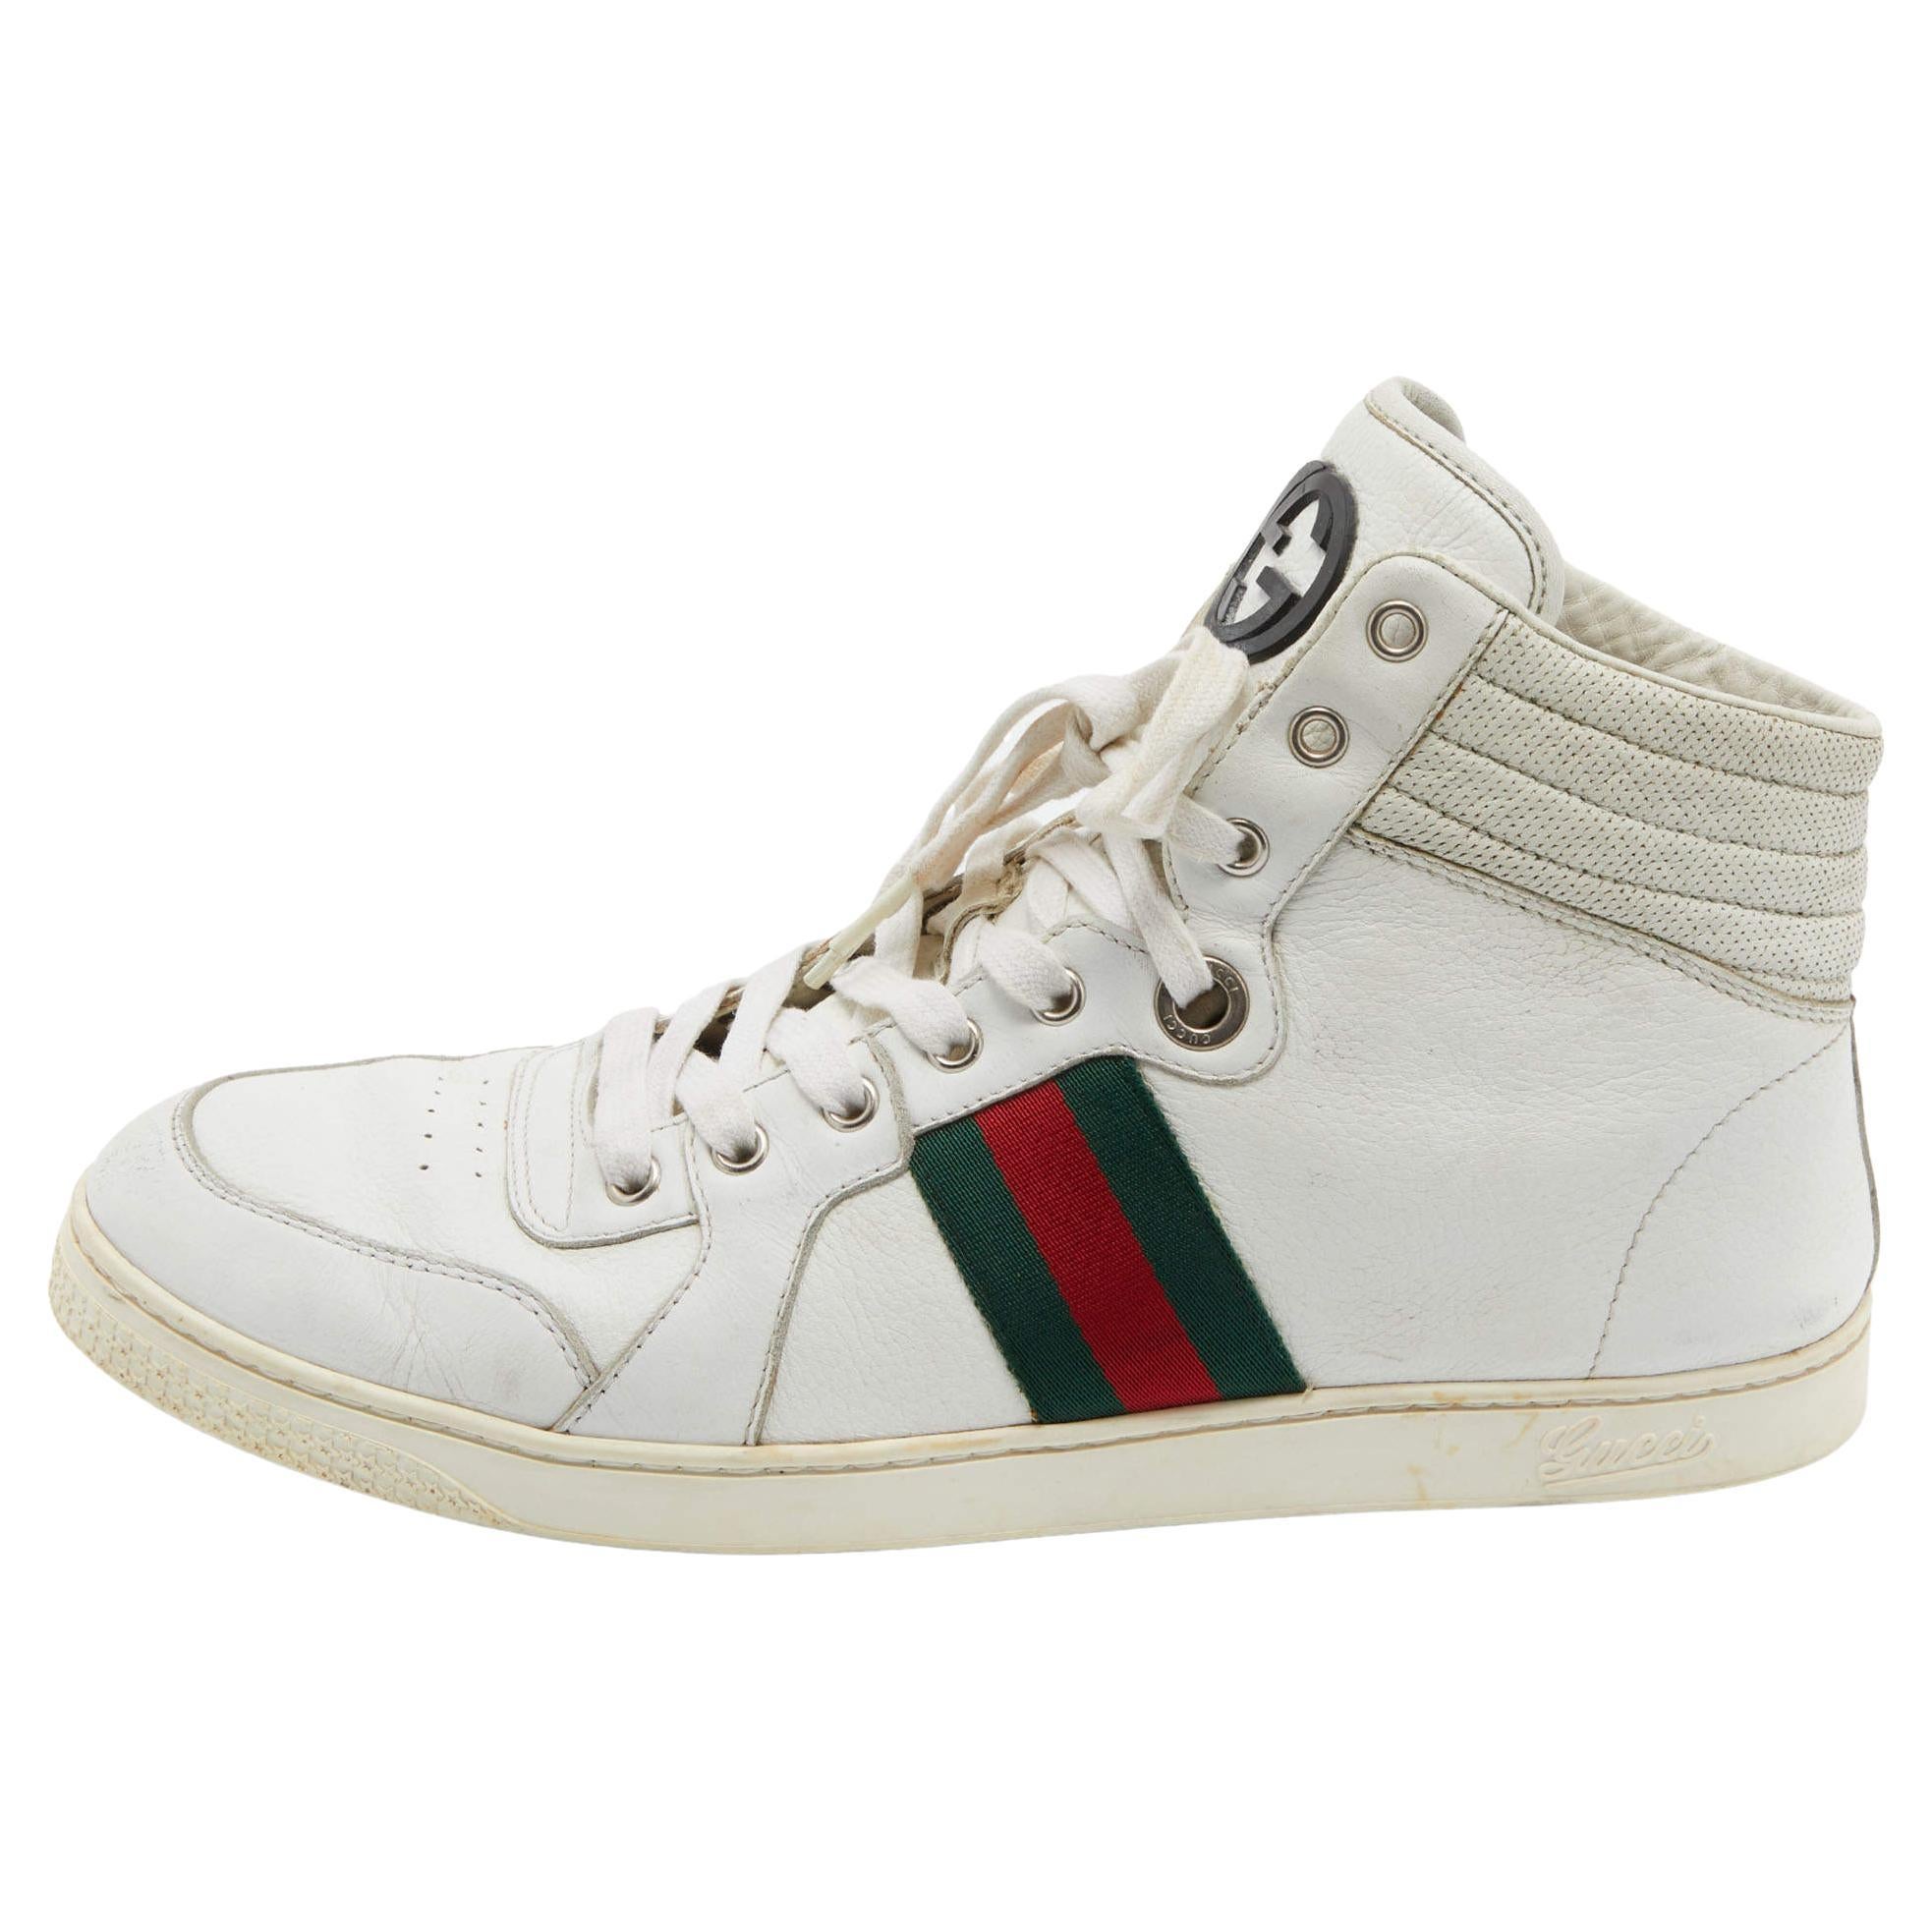 Gucci Grey Guccissima Leather Web High Top Sneakers Size 44.5 Gucci